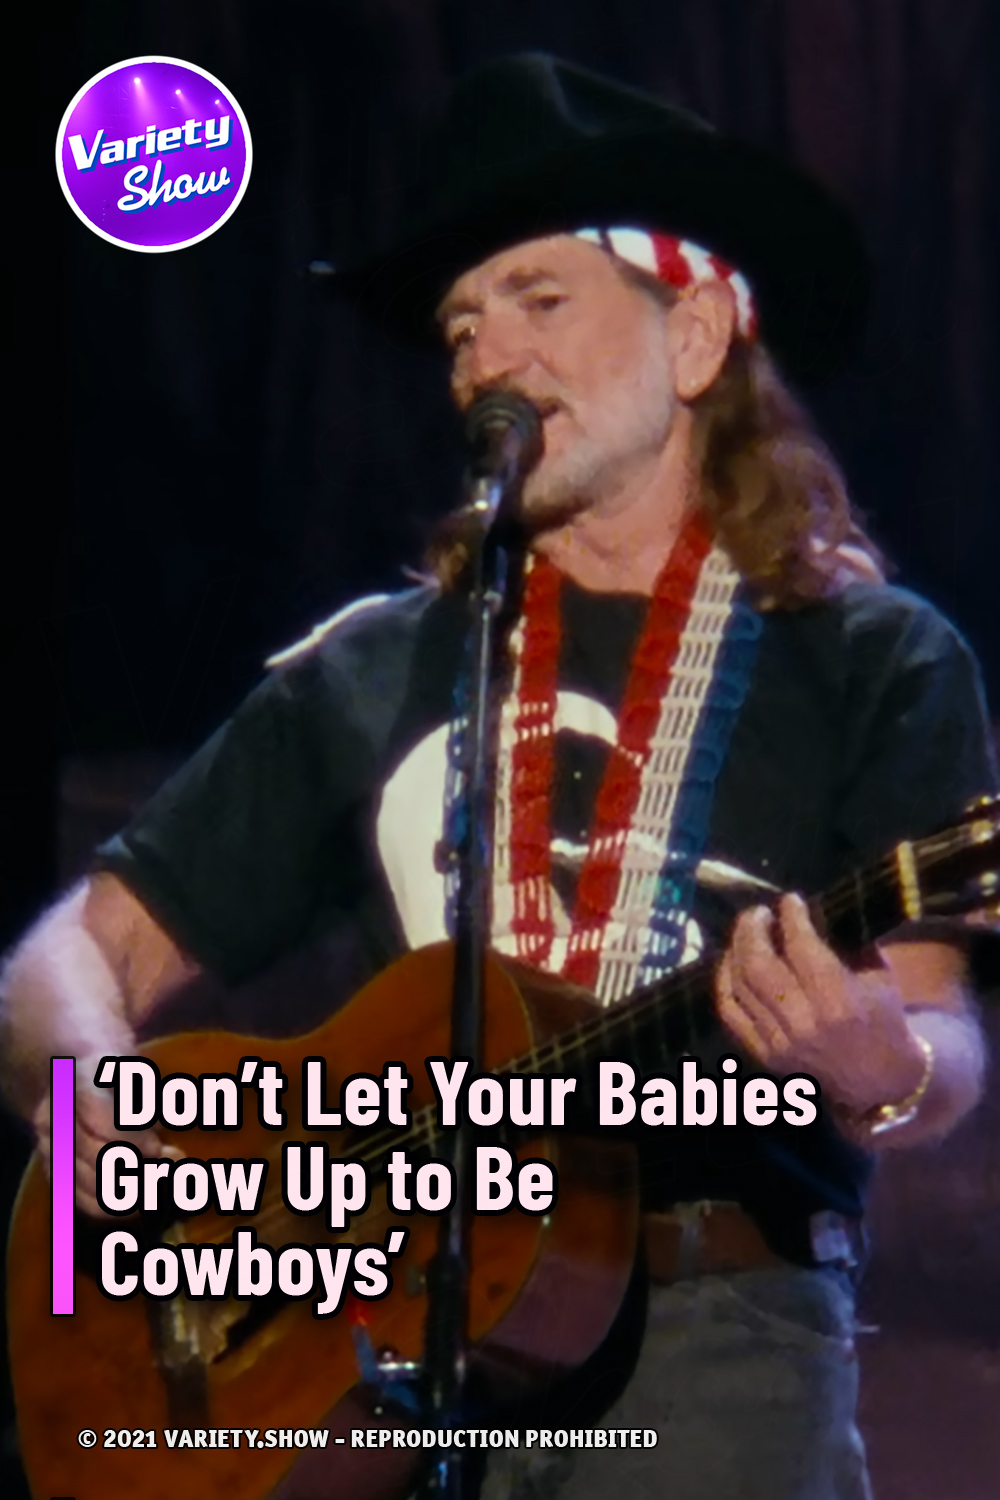 ‘Don’t Let Your Babies Grow Up to Be Cowboys’